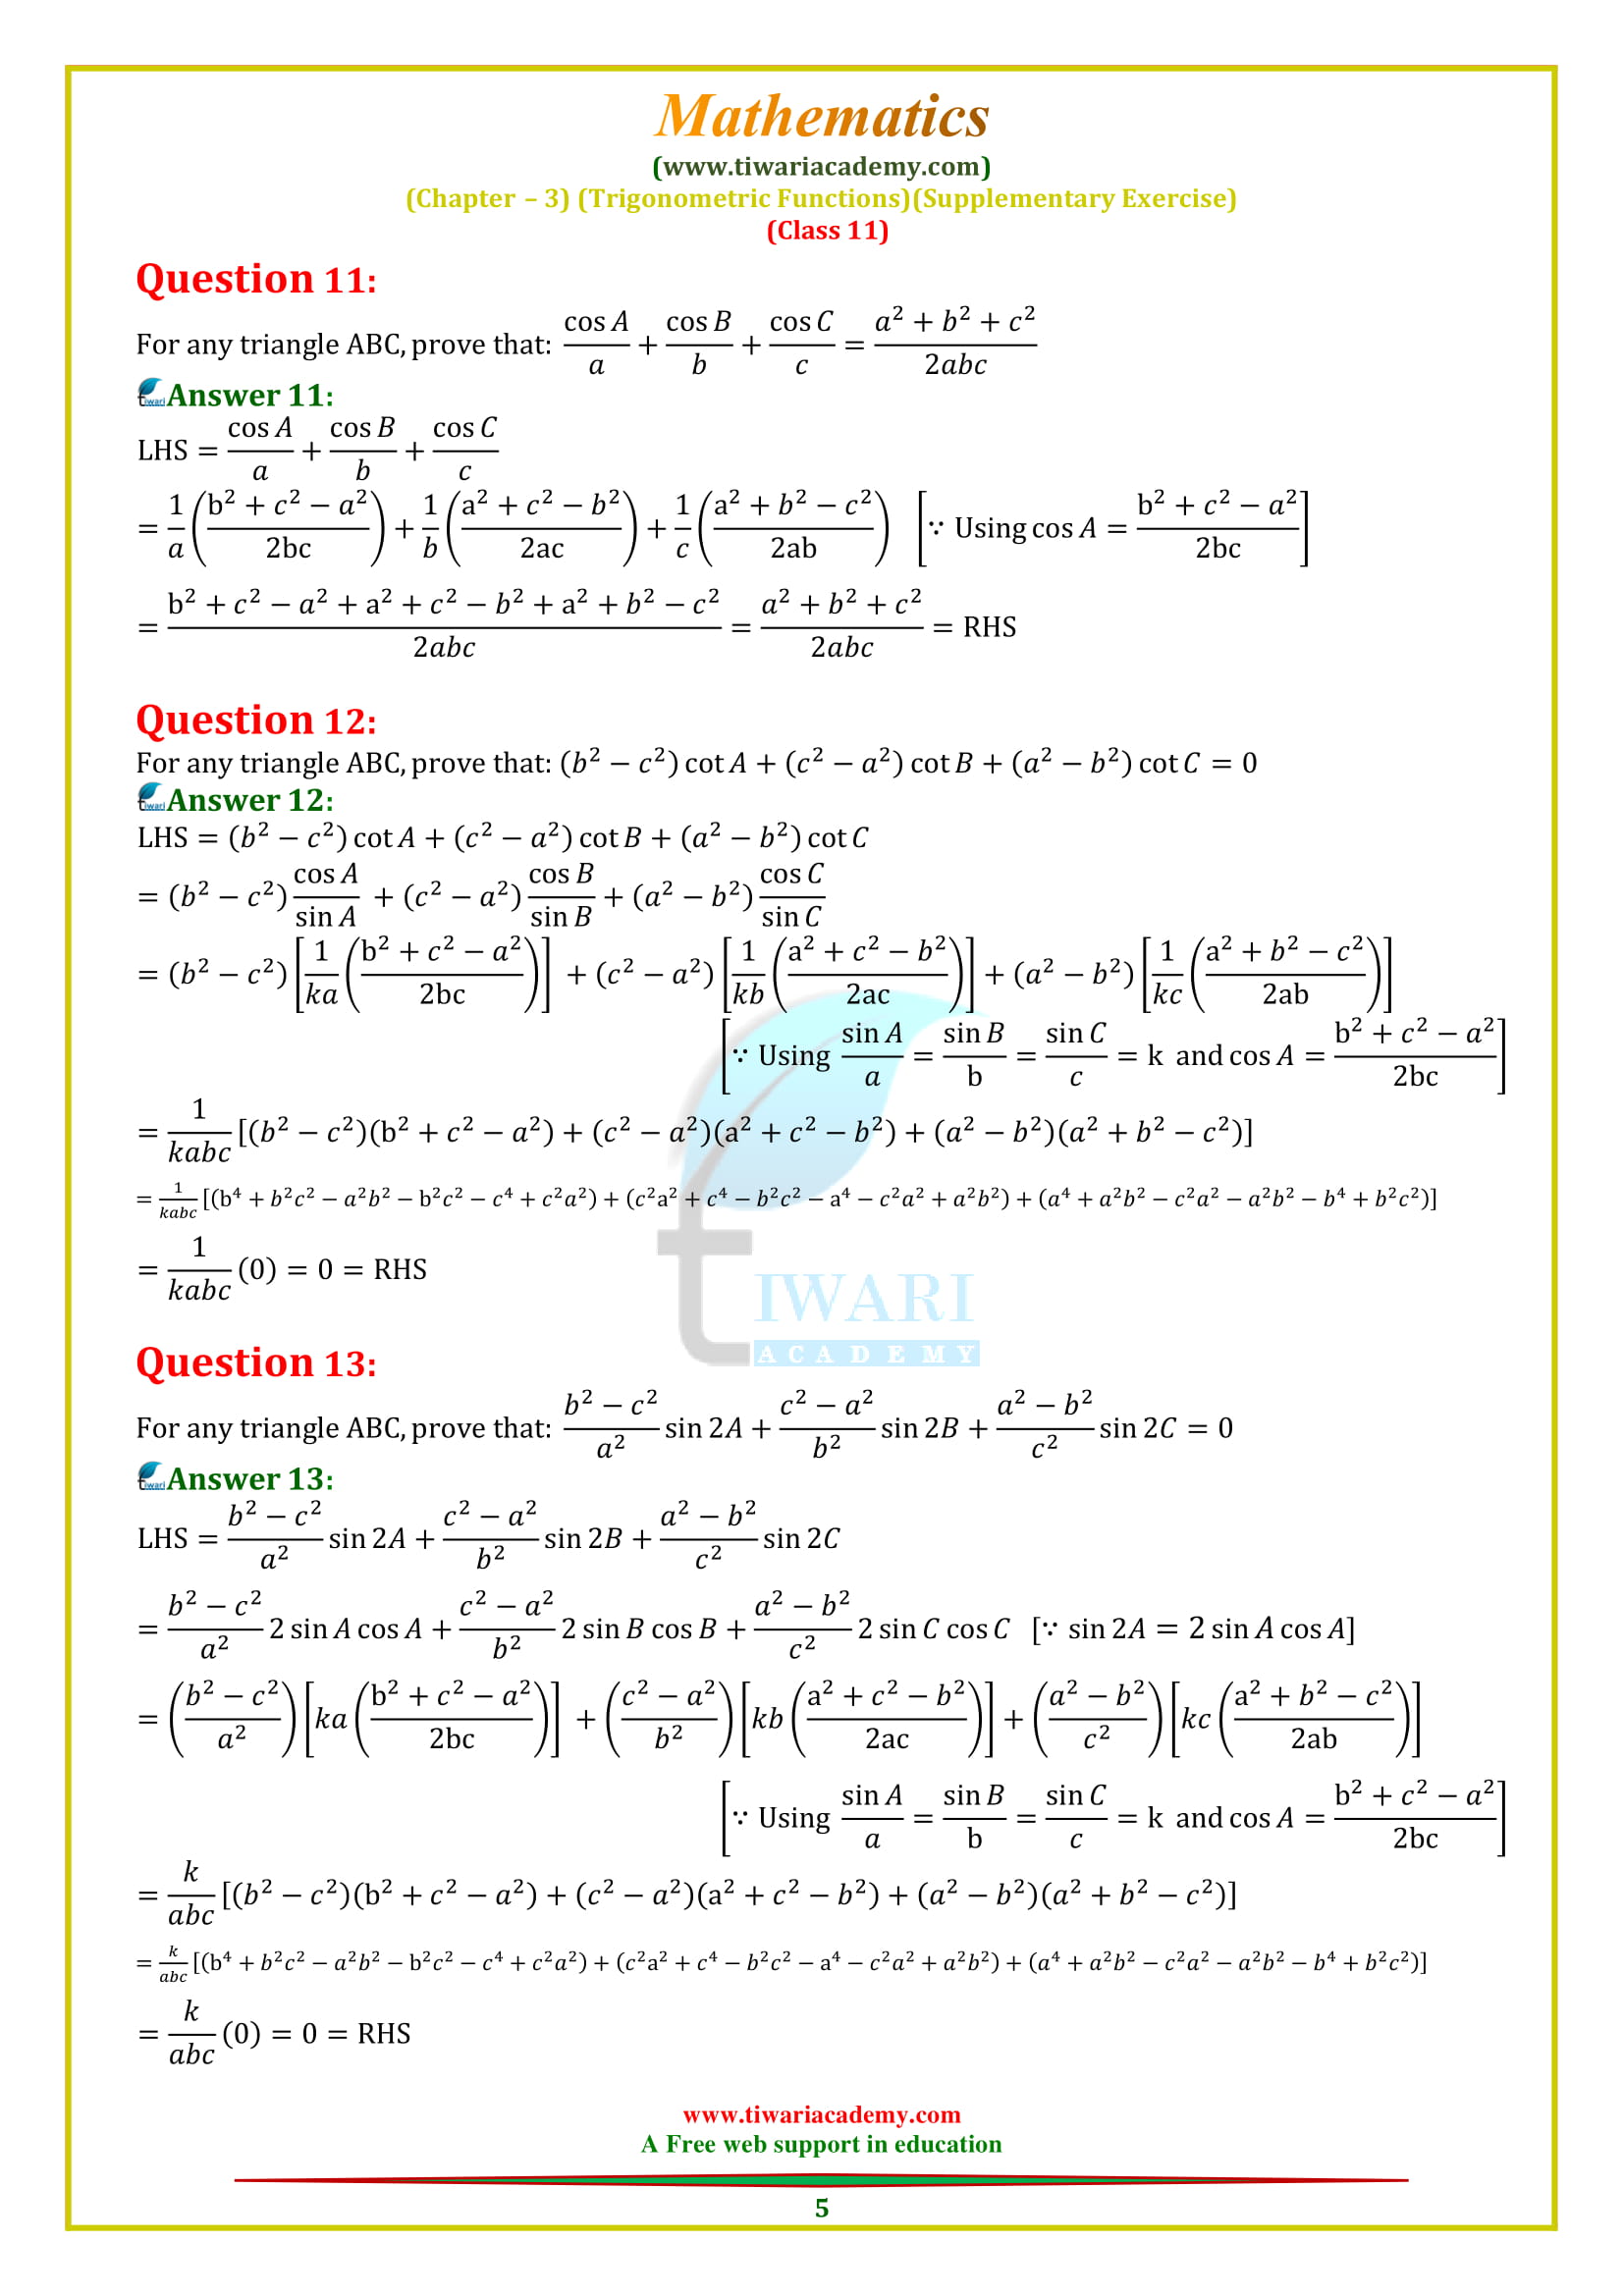 Class 11 Maths Chapter 3 Exercise 3.5 Supplementary Exercise for 2018-19.